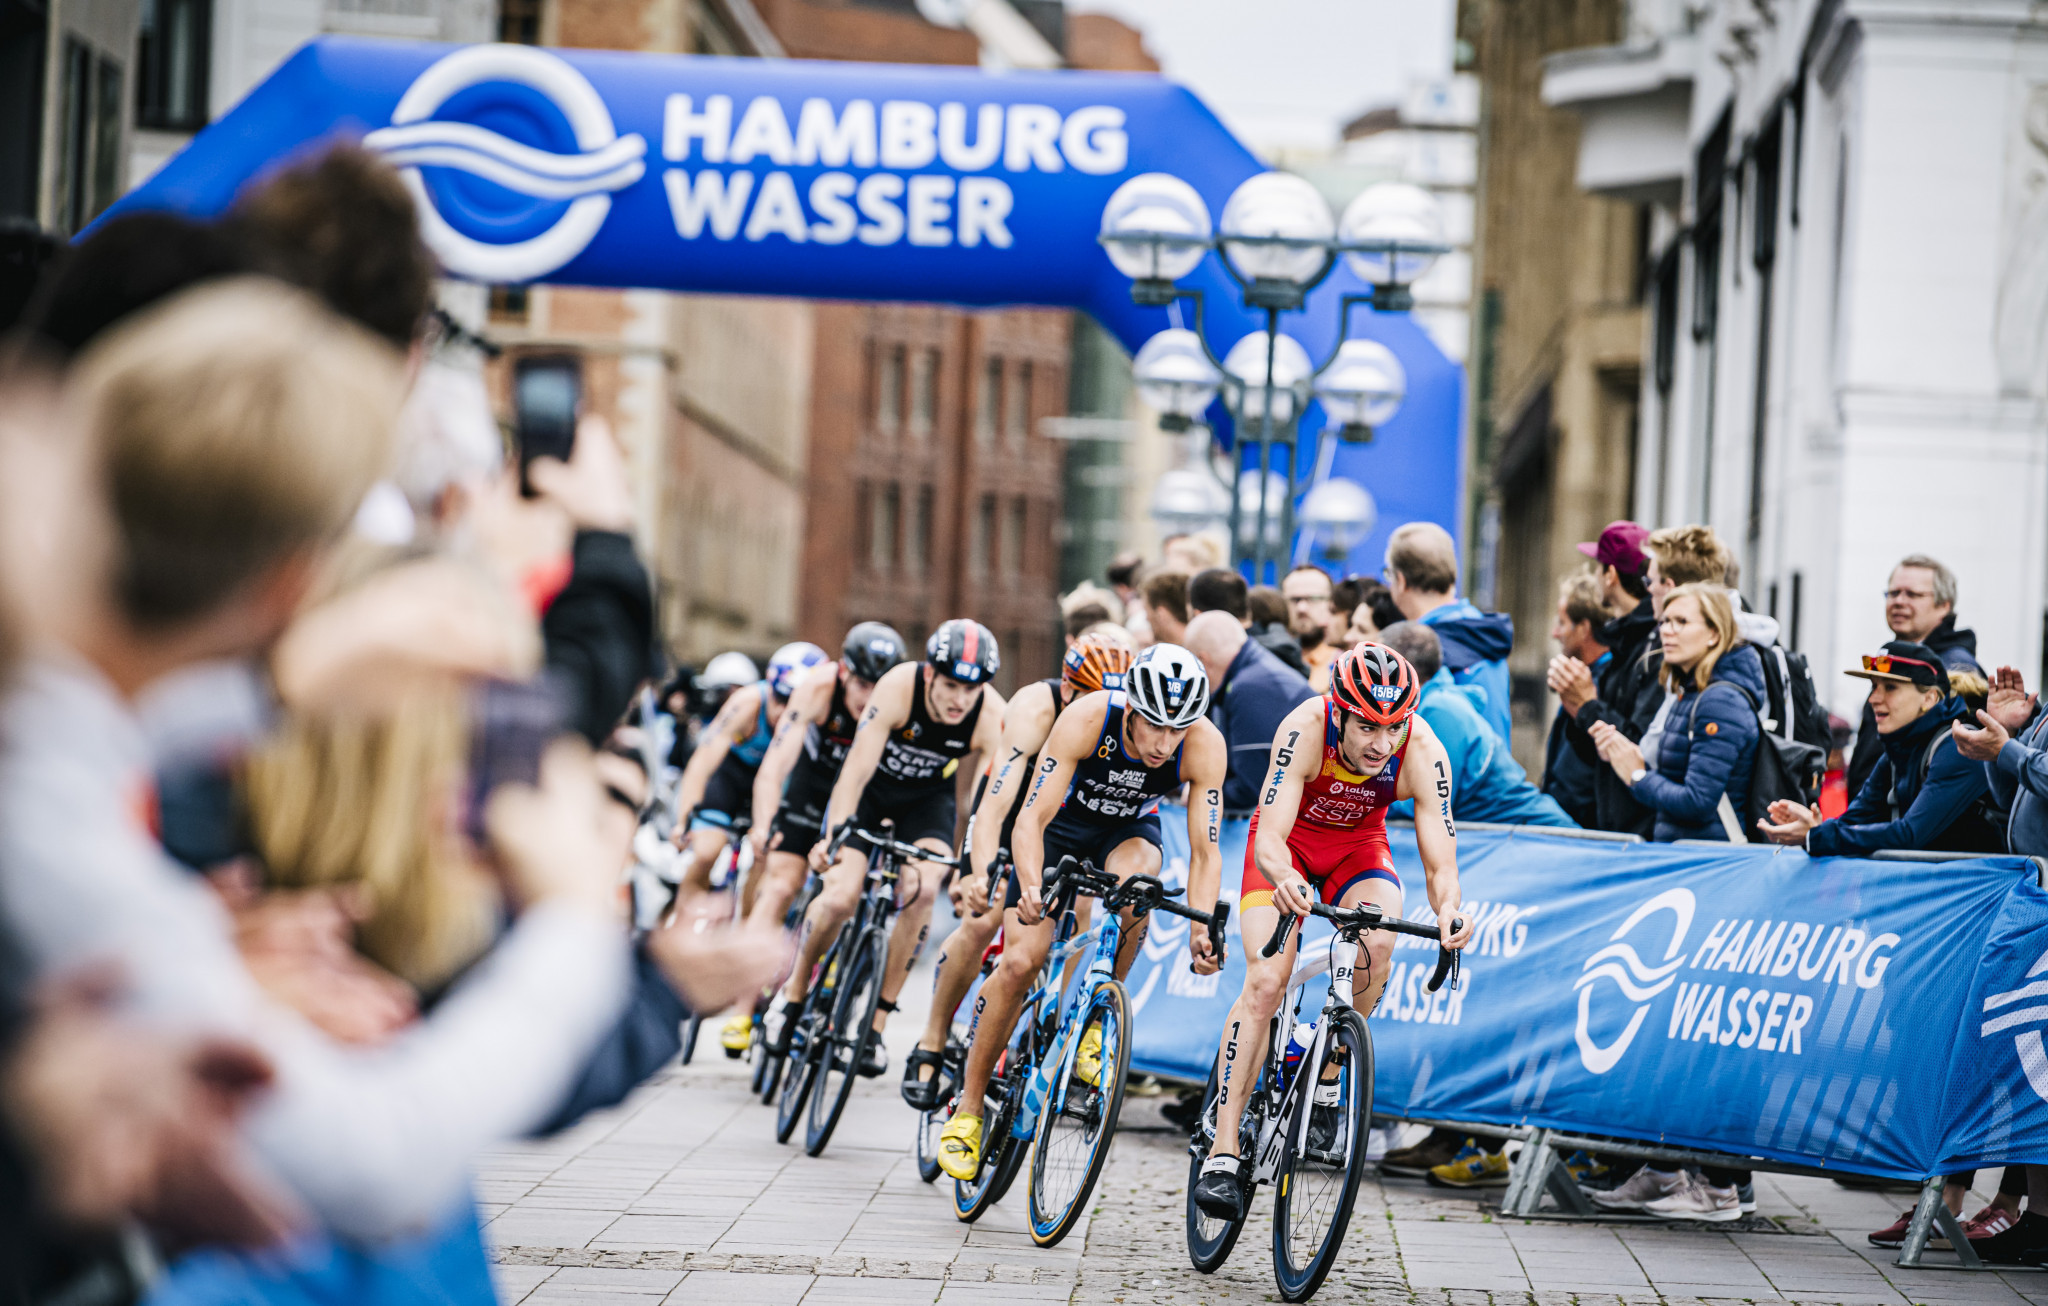 The Hamburg Wasser Triathlon, postponed from its original date next month, will now be held in September ©Getty Images